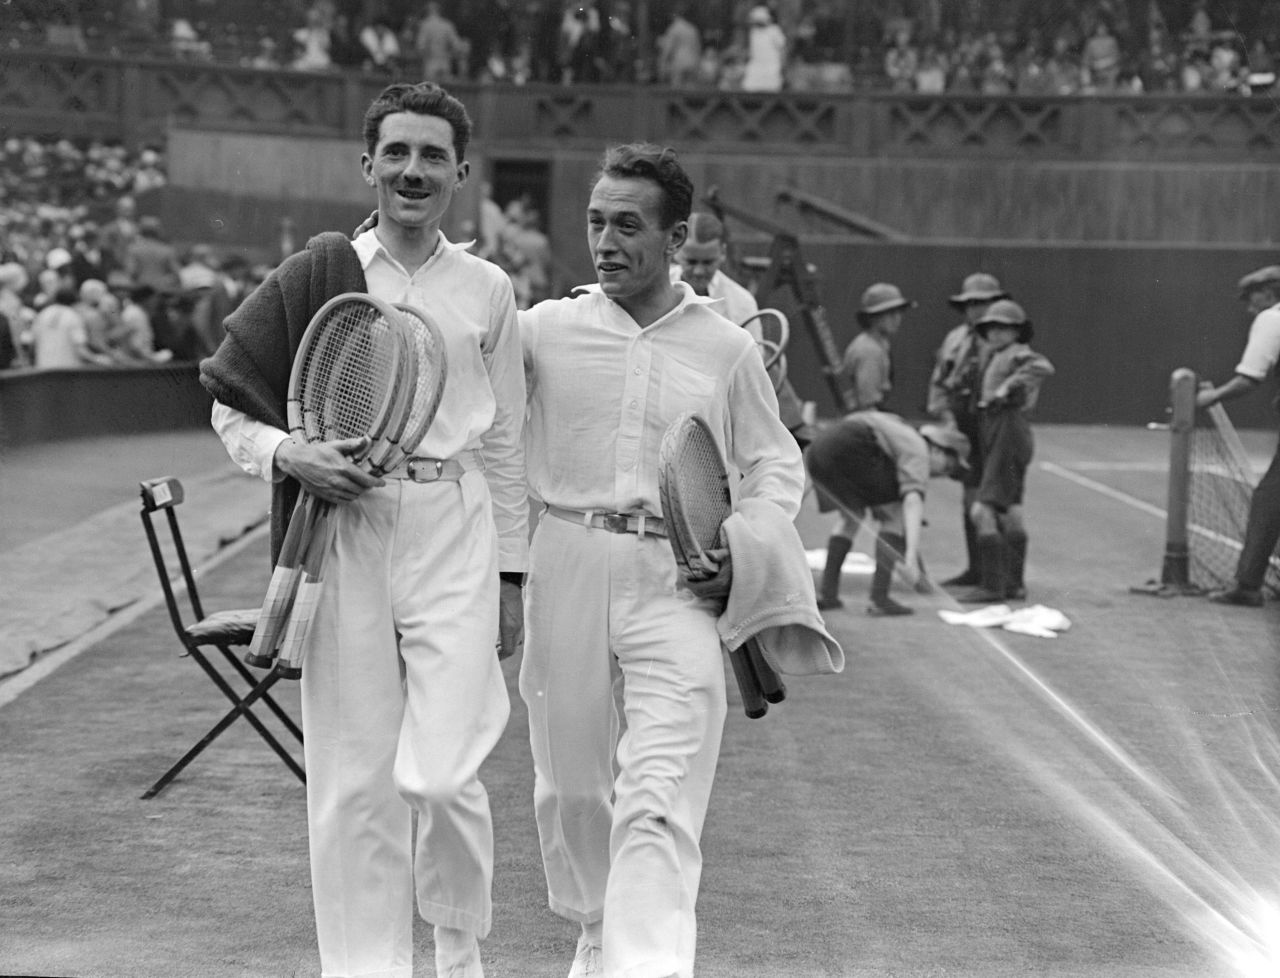 Brugnon, left, was a double specialist who never won a singles grand slam. He and Cochet leave the court after beating Americans Vincent Richards and Howard Kinsey in the 1926 Wimbledon final.